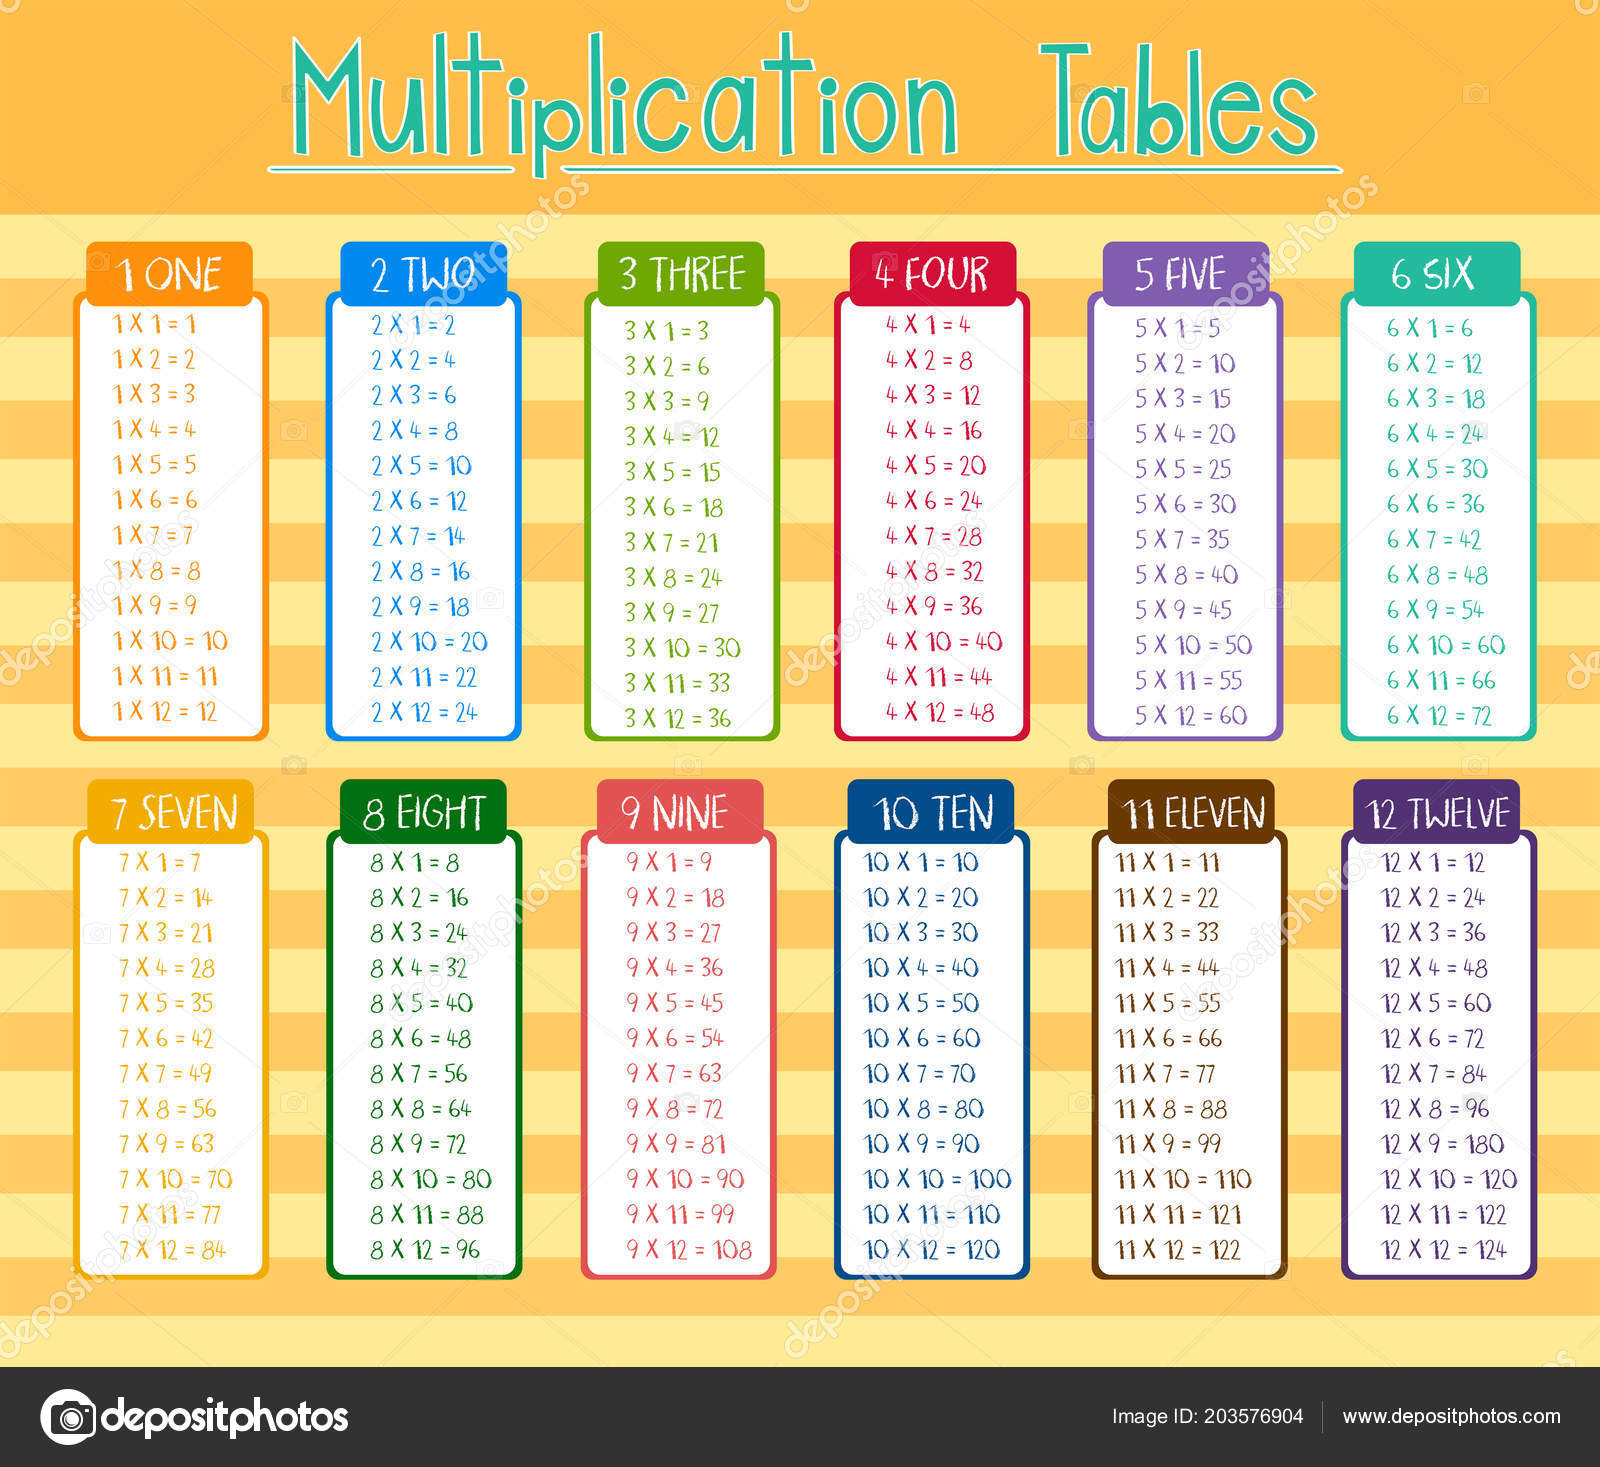 Colorful Multiplication Tables Poster Illustration Stock Vector Image